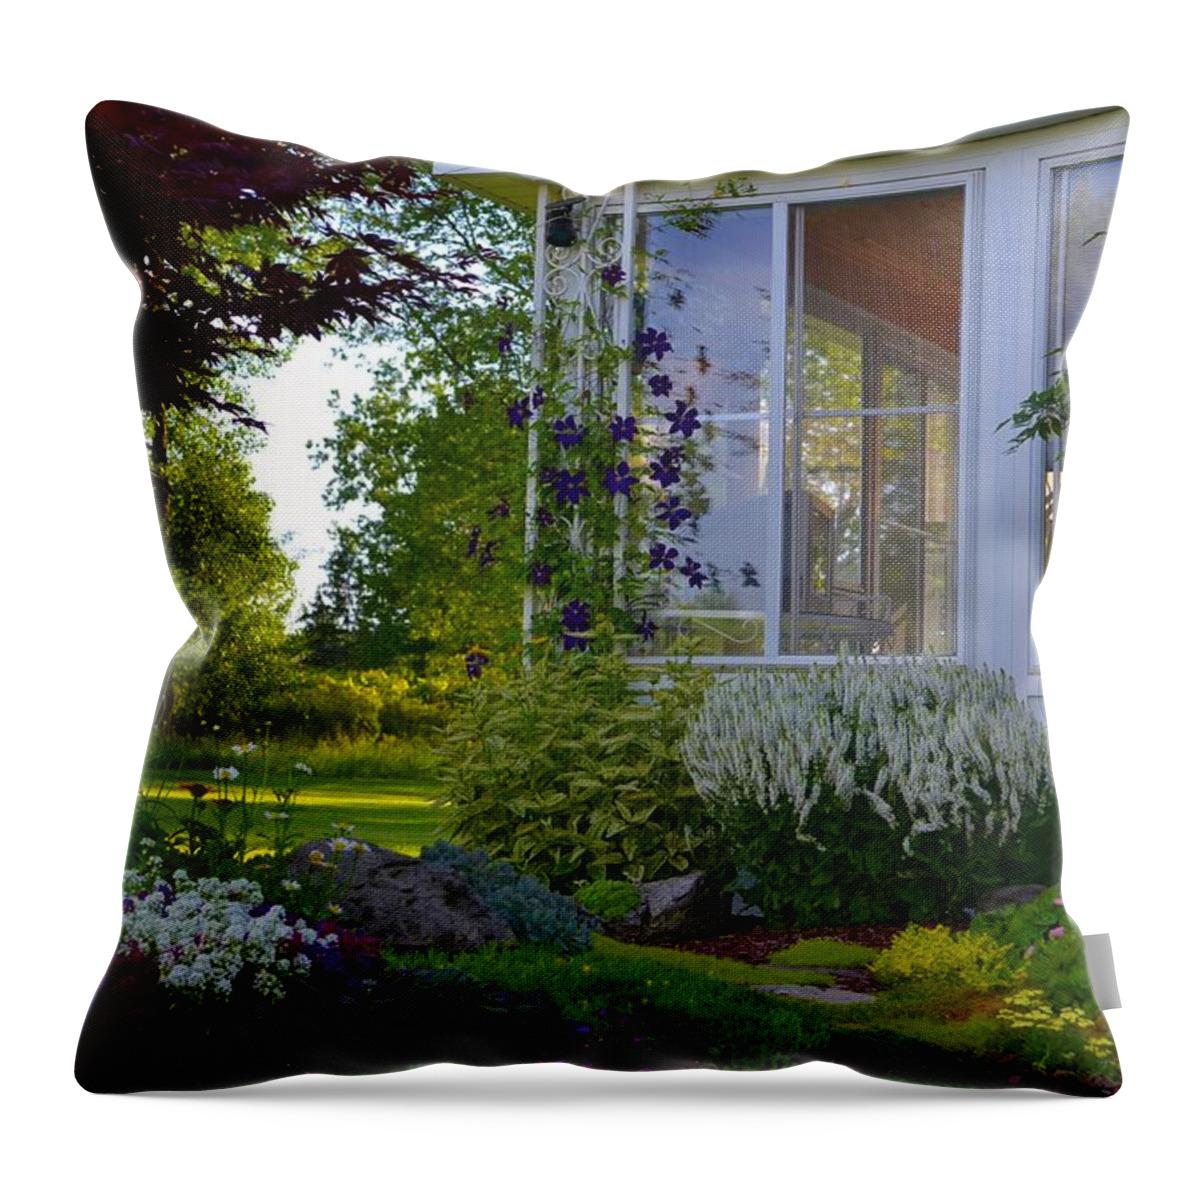 Colors Throw Pillow featuring the photograph Home Garden by Michael Mrozik